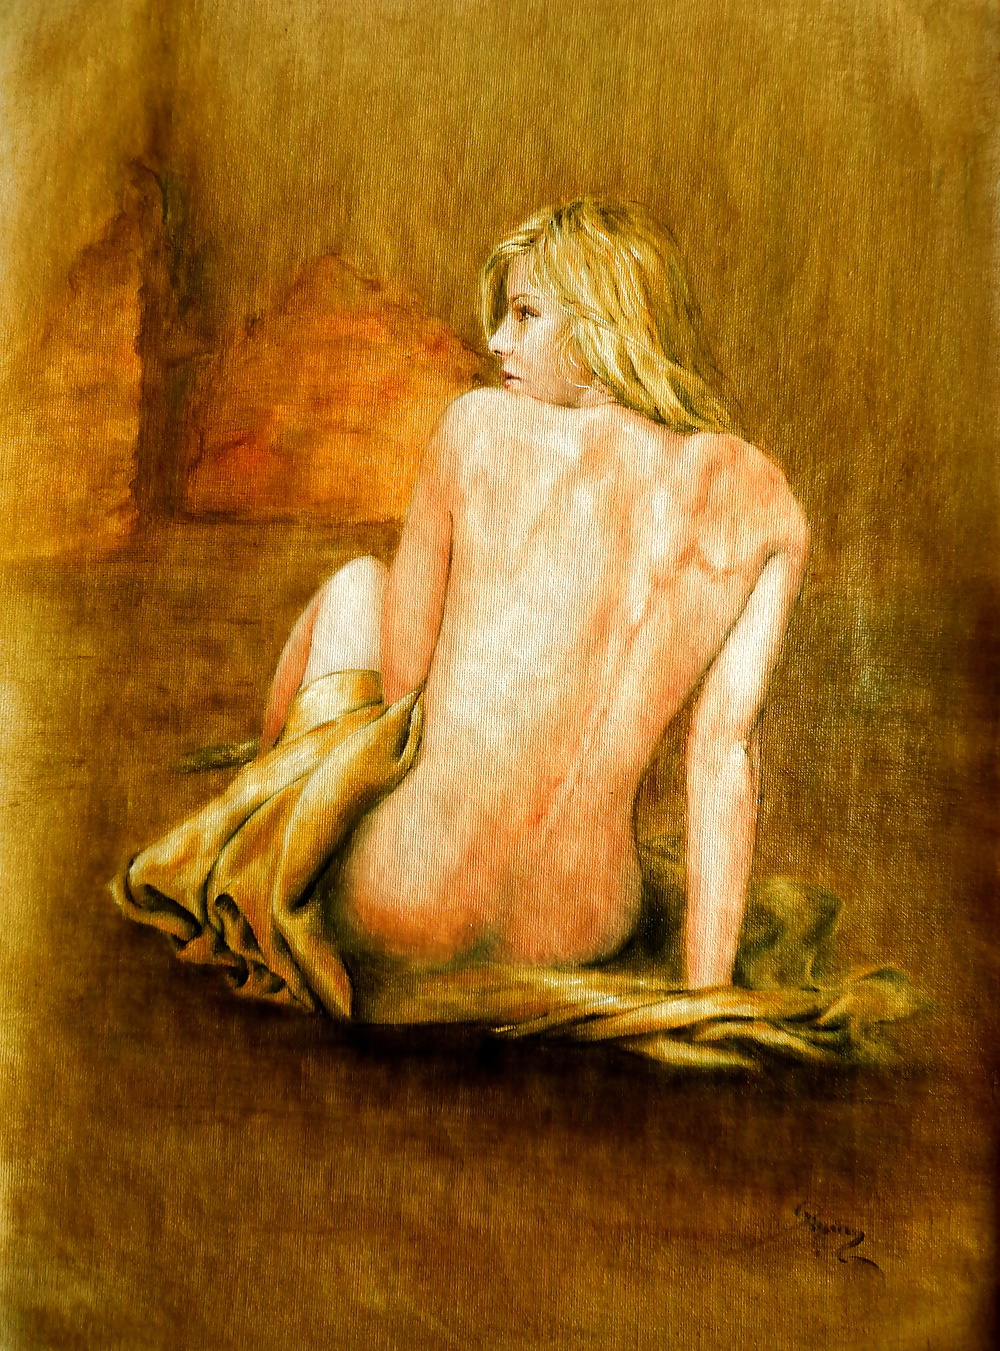 Nudes on oil porn pictures